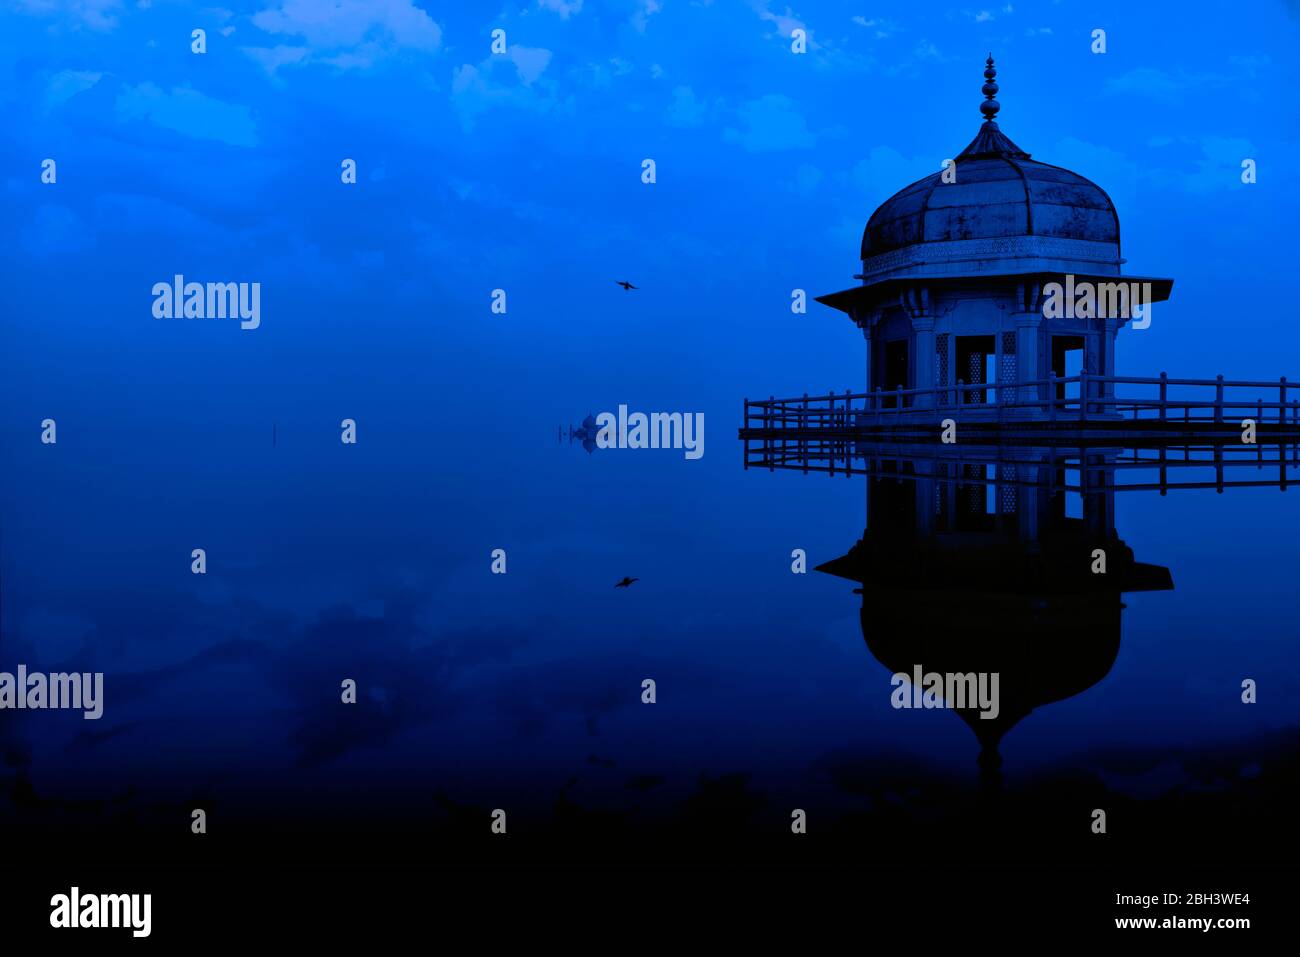 Digital manipulation conceptual image of Jasmine tower, in Agra fort, appearing partially submerged in water with a beautiful blue evening sky. Stock Photo